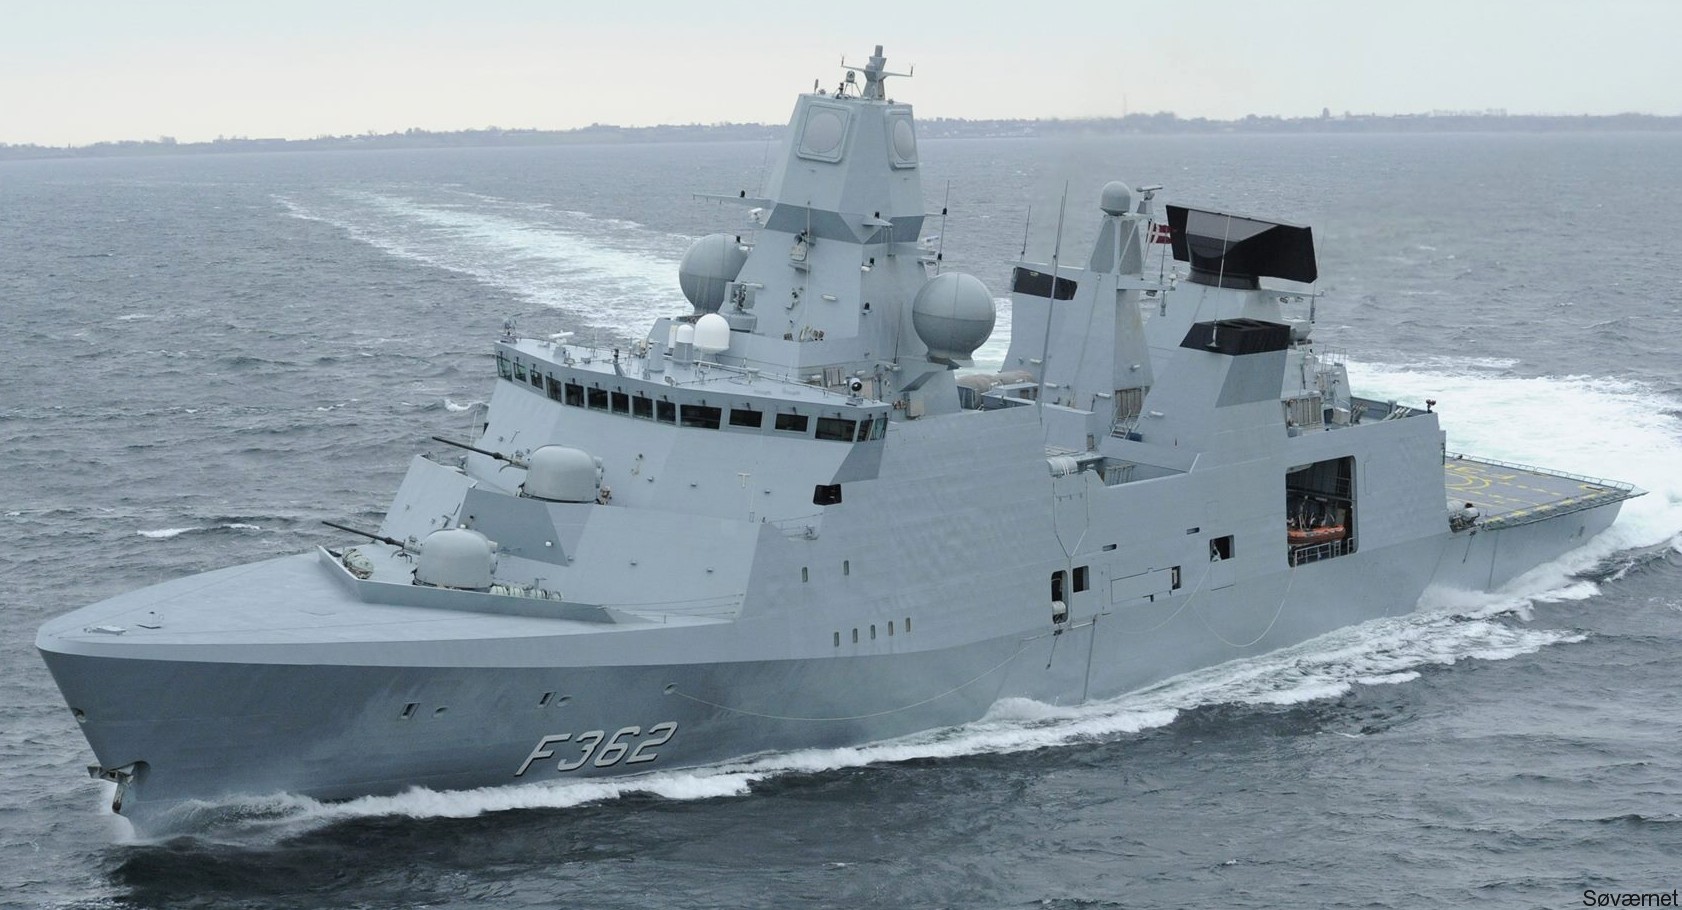 f-362 hdms peter willemoes iver huitfeldt class guided missile frigate ffg royal danish navy 59